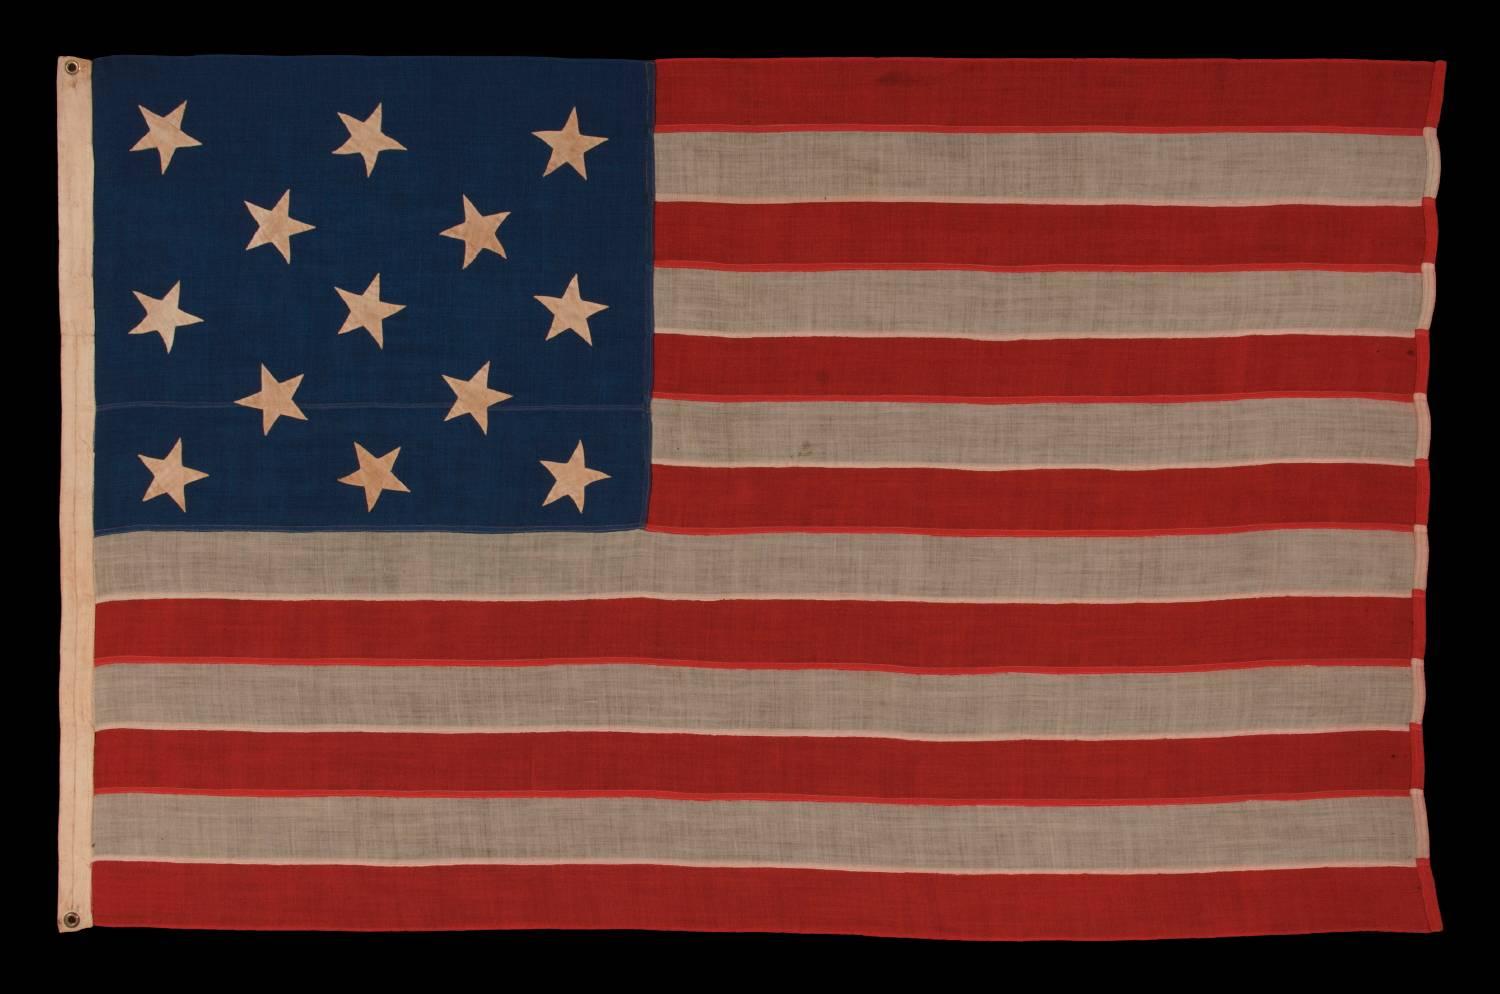 13 hand-sewn stars In A 3-2-3-2-3 pattern on an antique American flag of the 1876 Centennial era, possibly a U.S. Navy small boat ensign:

Despite the fact that America hasn't been comprised of 13 states since 1791, 13 star flags have been made